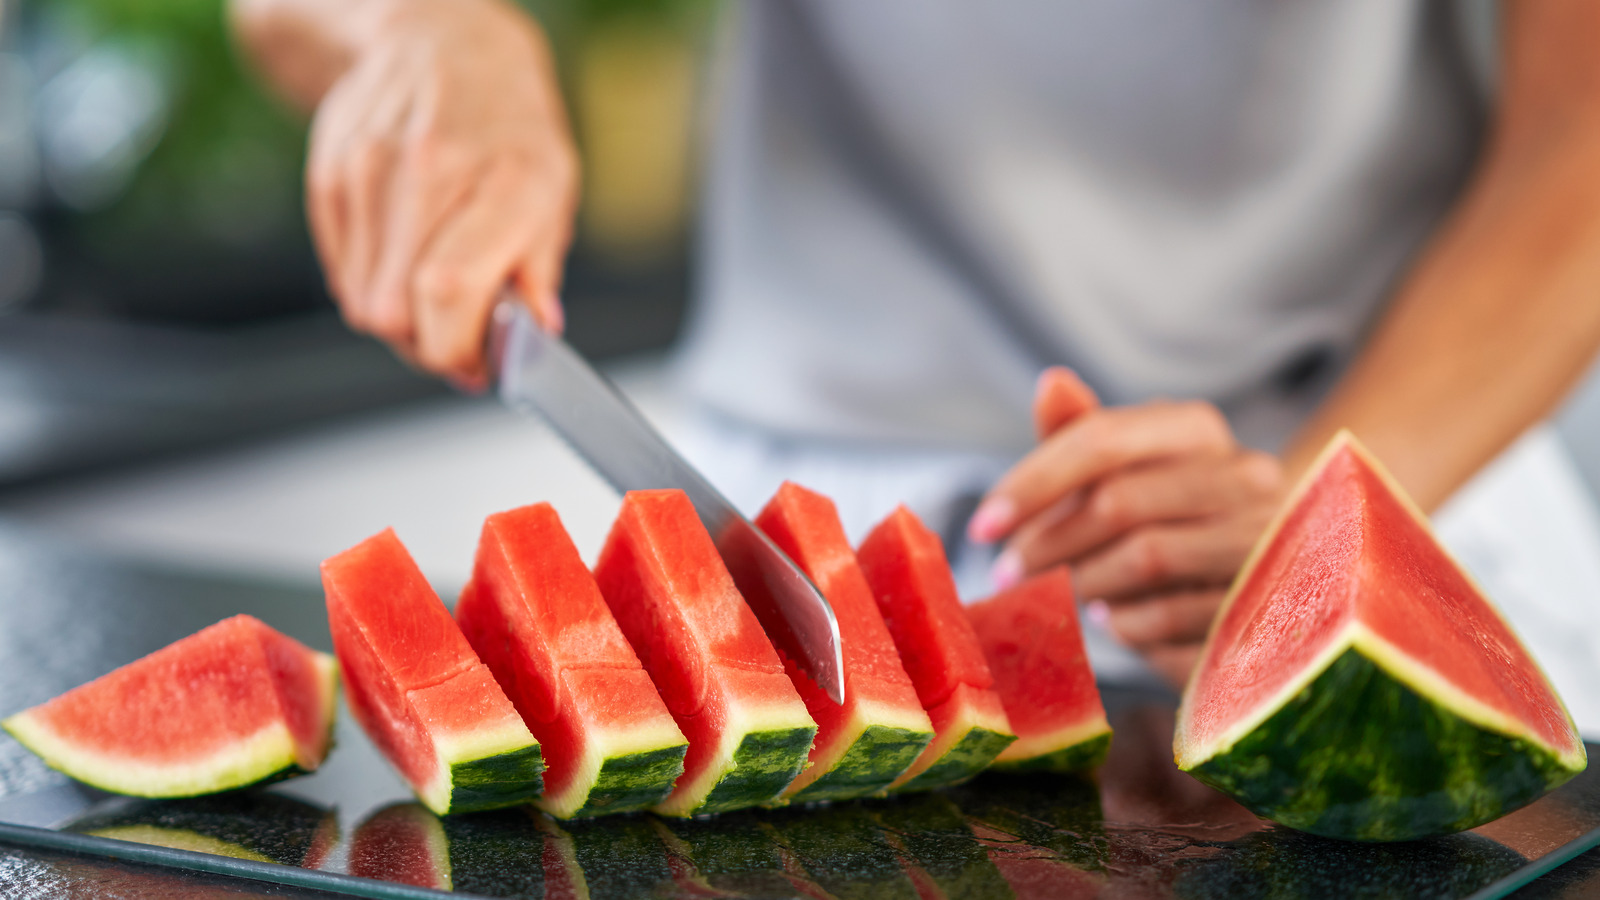 https://www.thedailymeal.com/img/gallery/why-you-should-be-using-a-bread-knife-to-cut-fruit/l-intro-1678977628.jpg